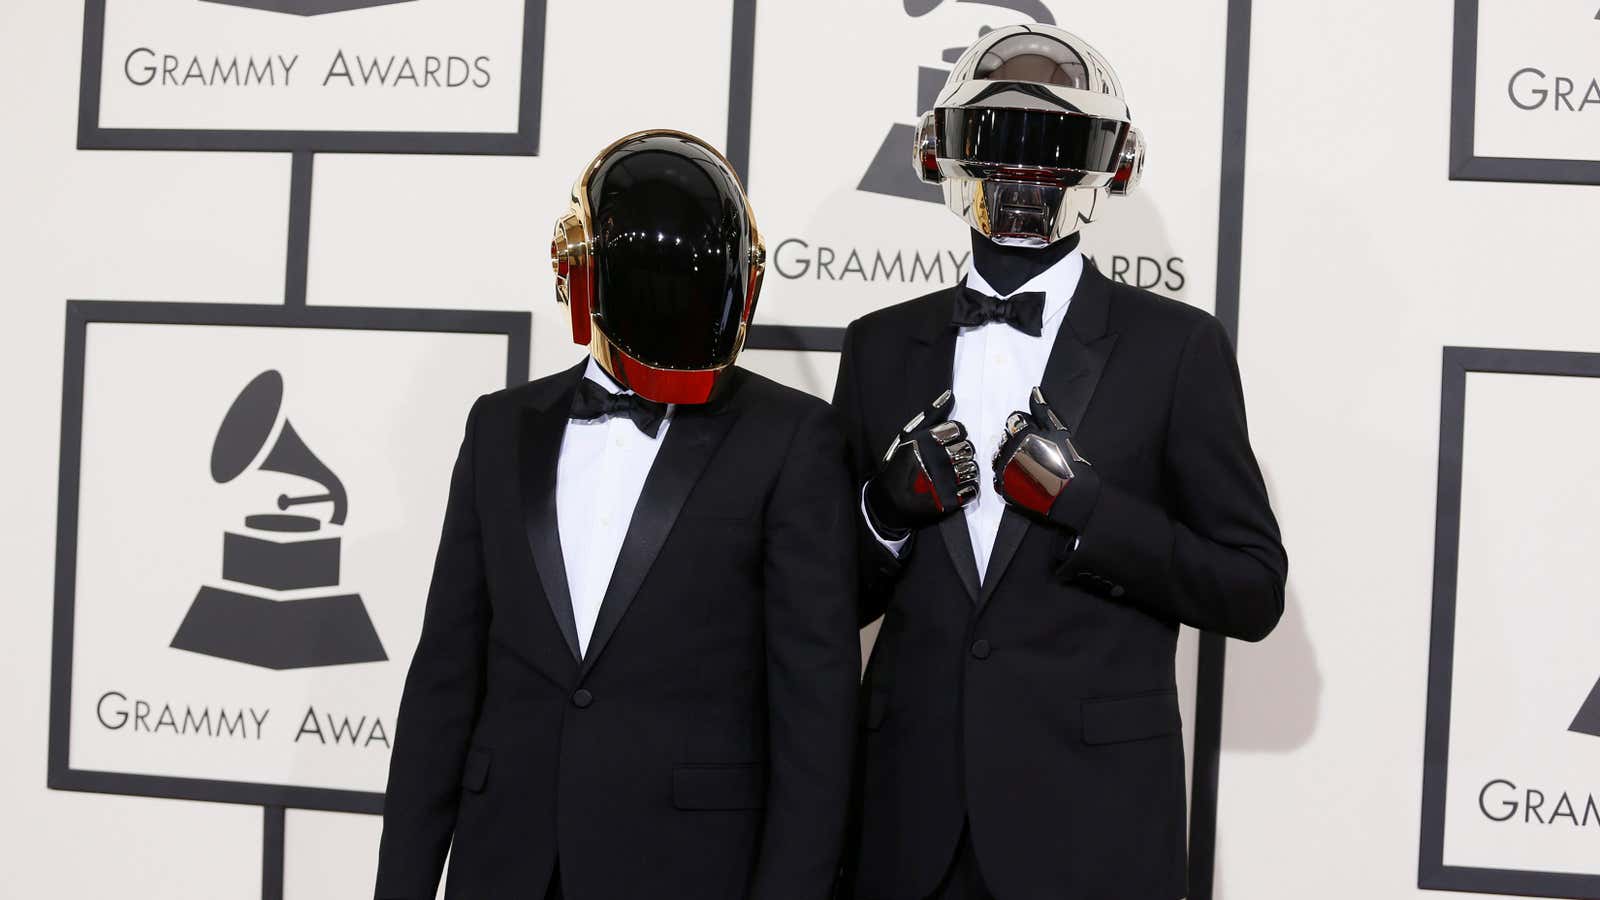 Daft Punk at the 56th annual Grammy Awards.